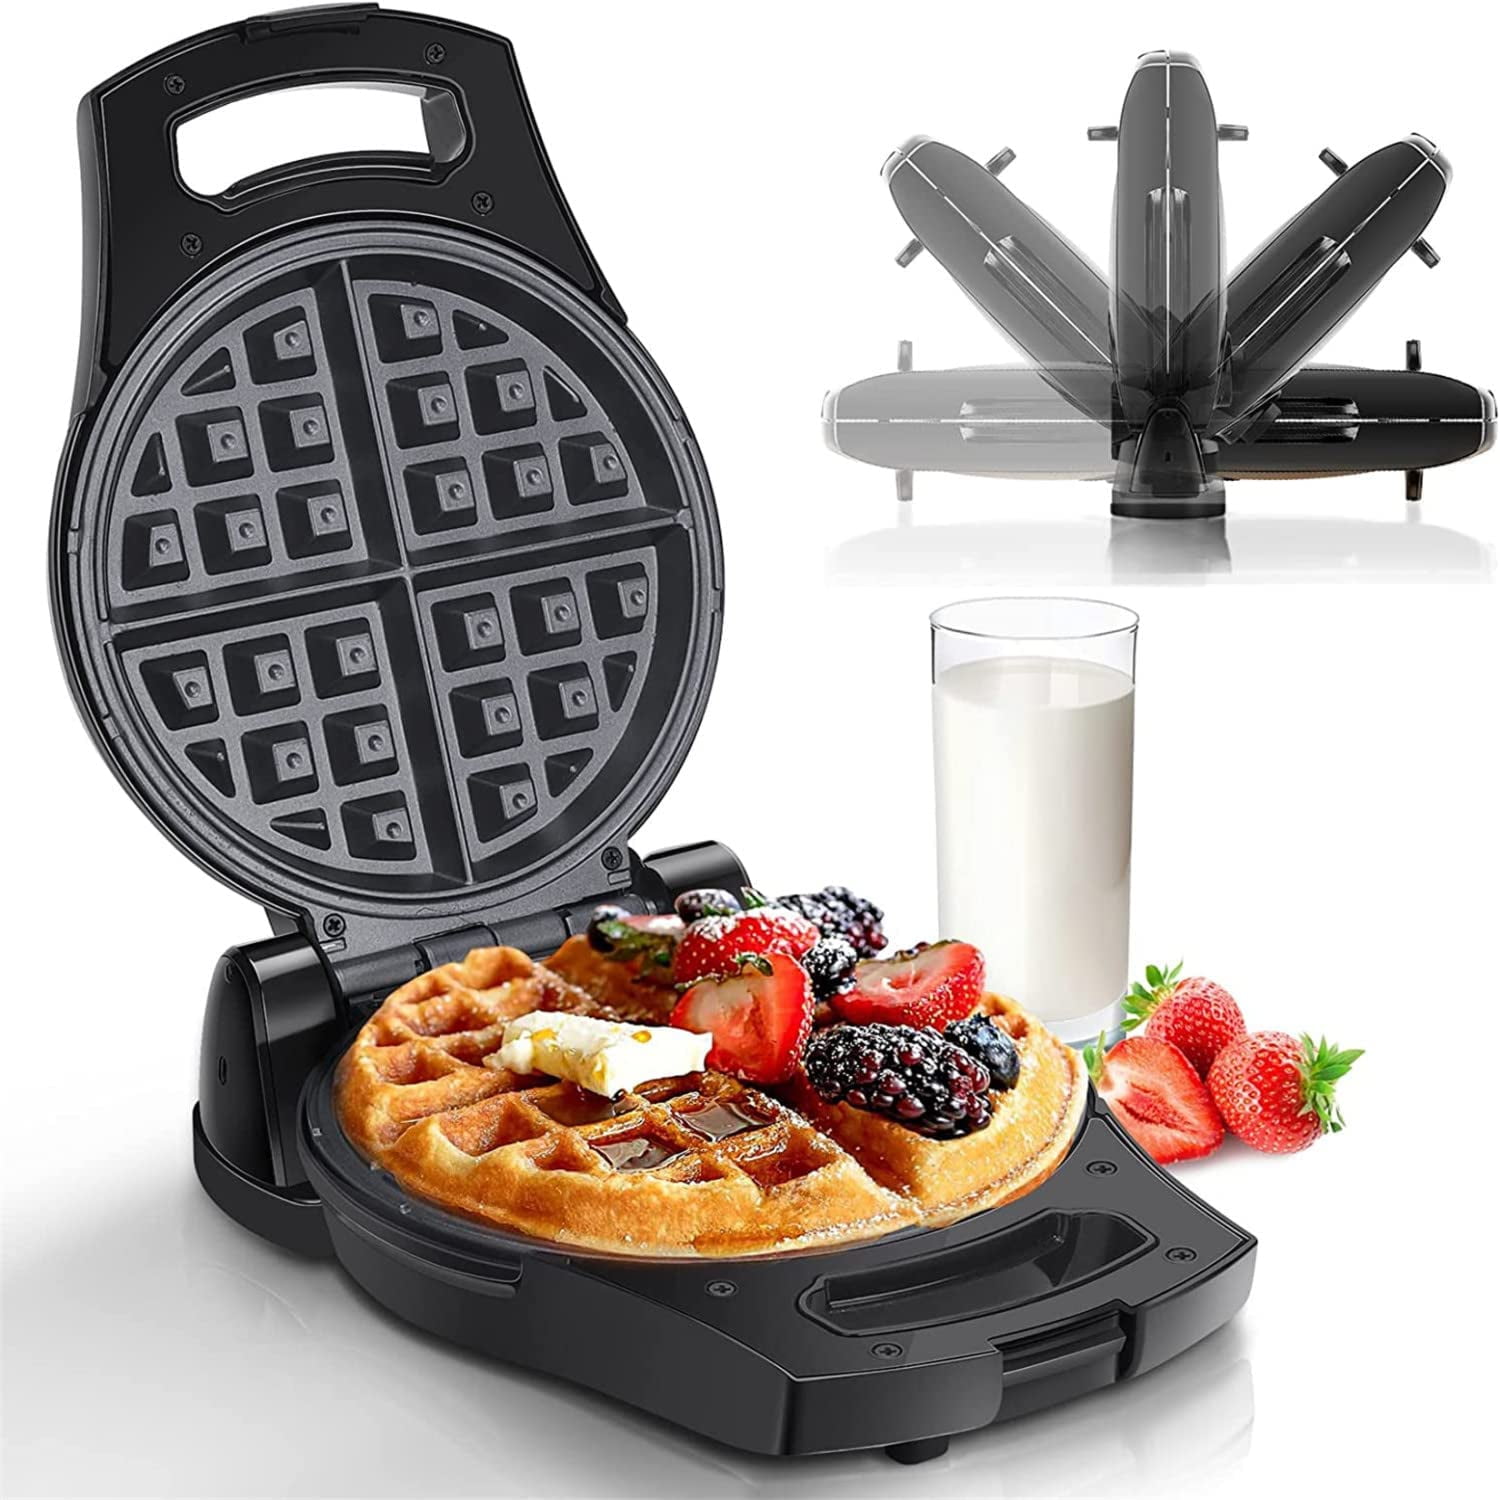 Equipex GES20/1, 1.75 kW Electric Waffle Maker / Iron, Single, 6 1